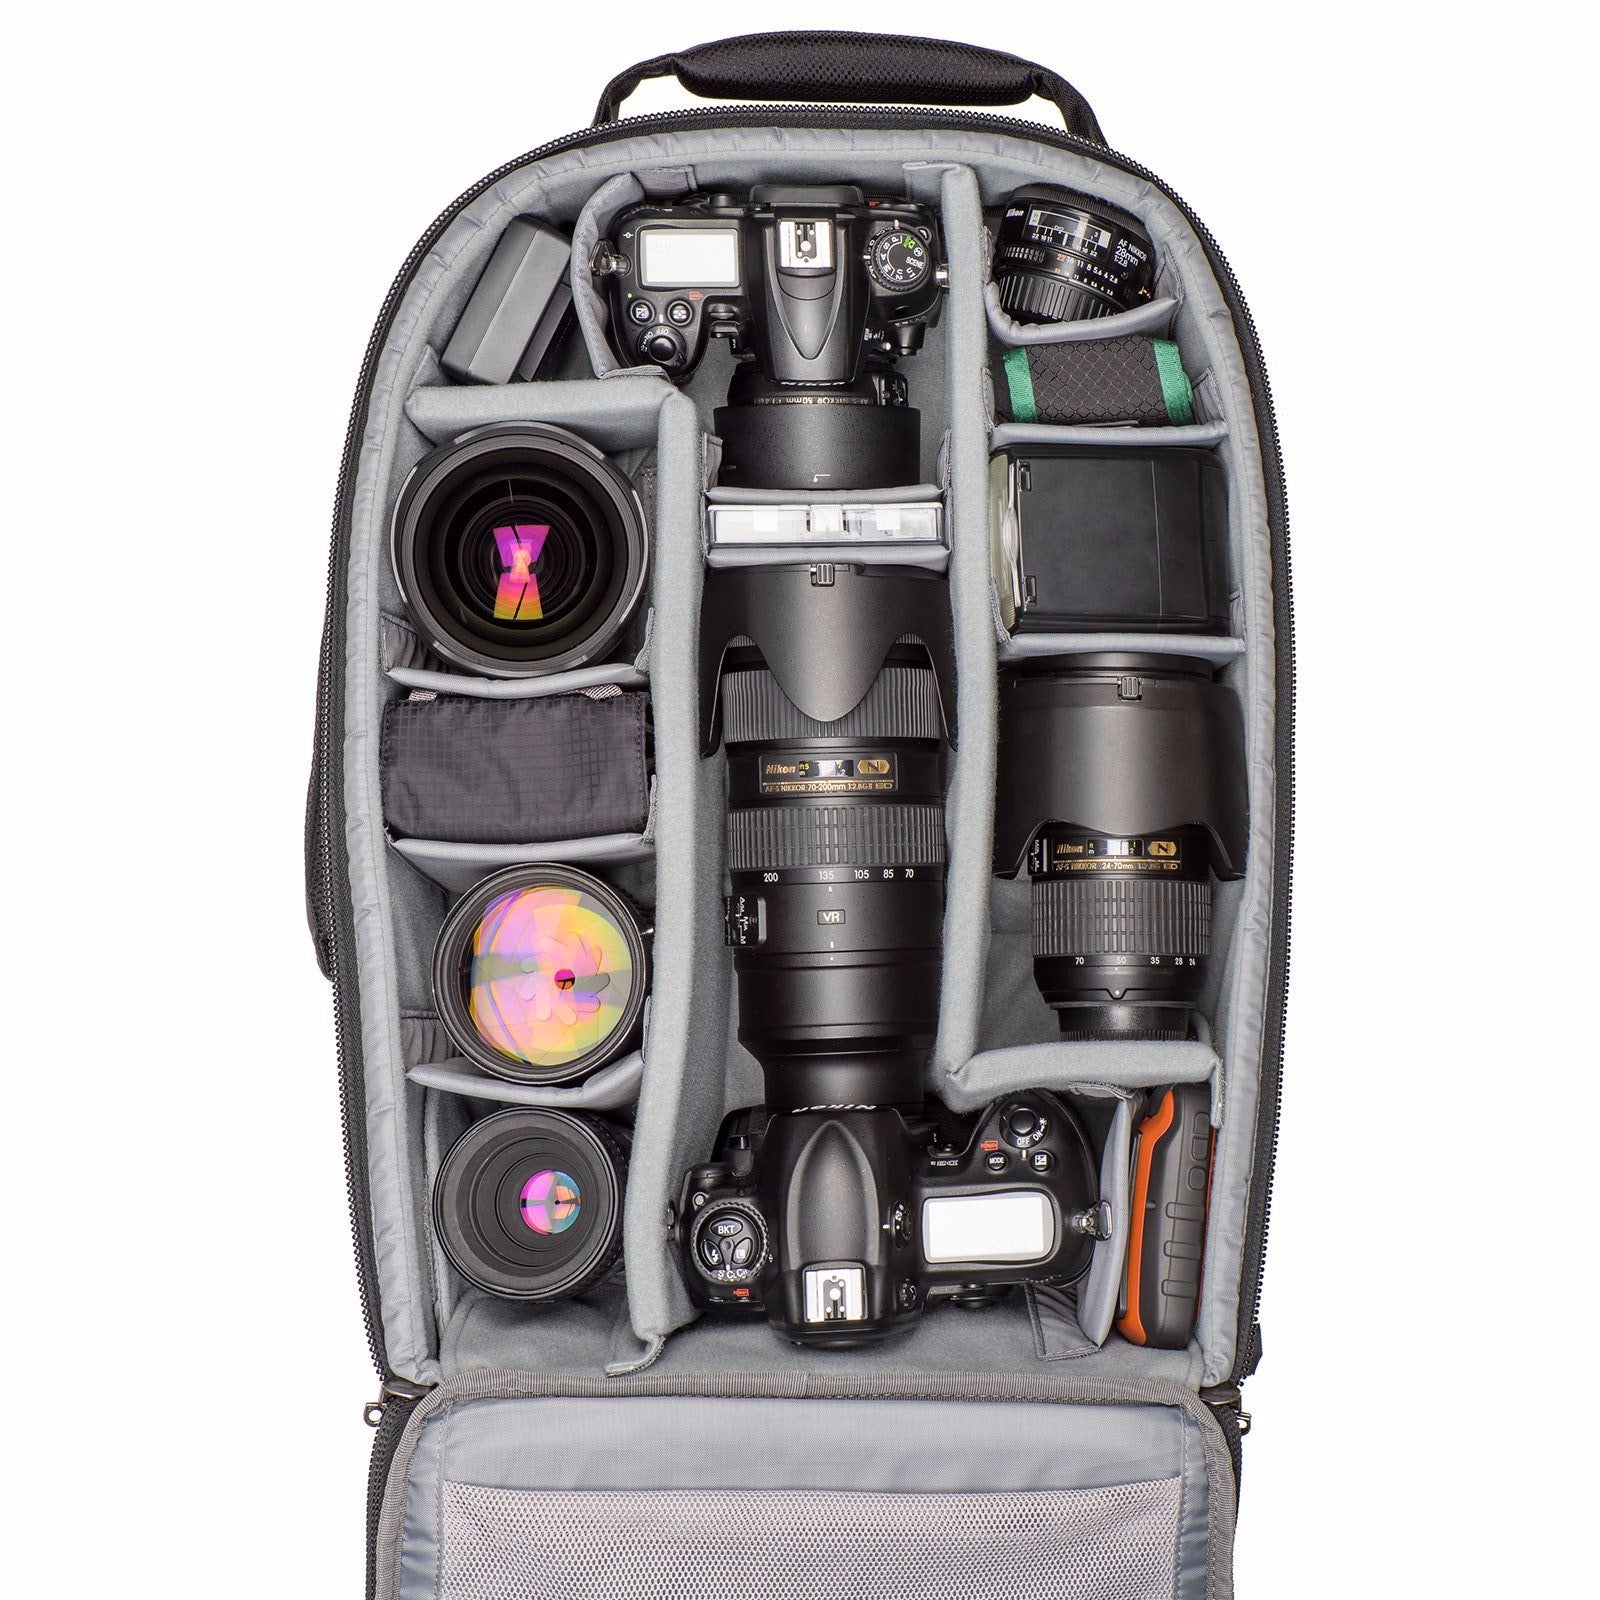 Nikon DSLR bodies with lenses attached, five additional lenses, flash, and accessories